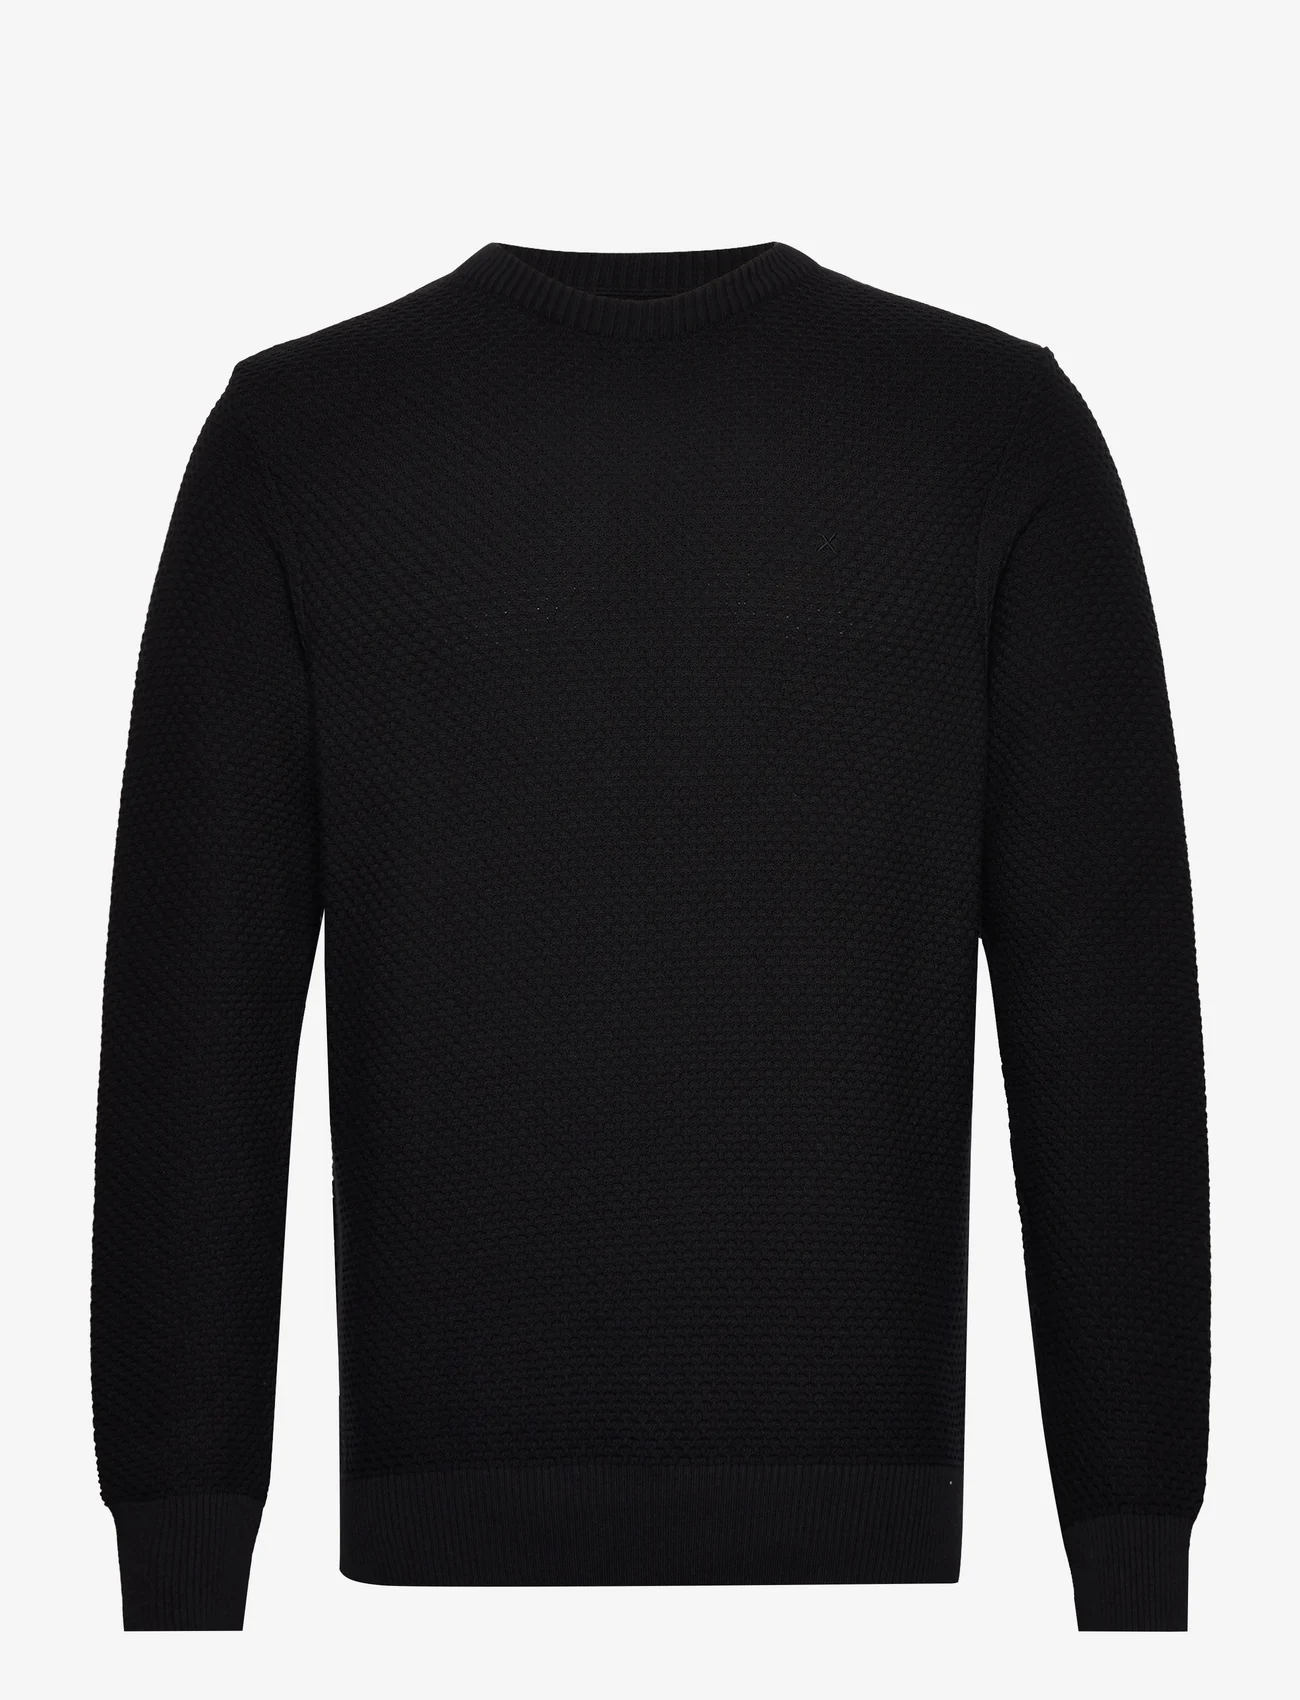 Clean Cut Copenhagen - Oliver Recycled O-neck Knit - rundhals - black - 0